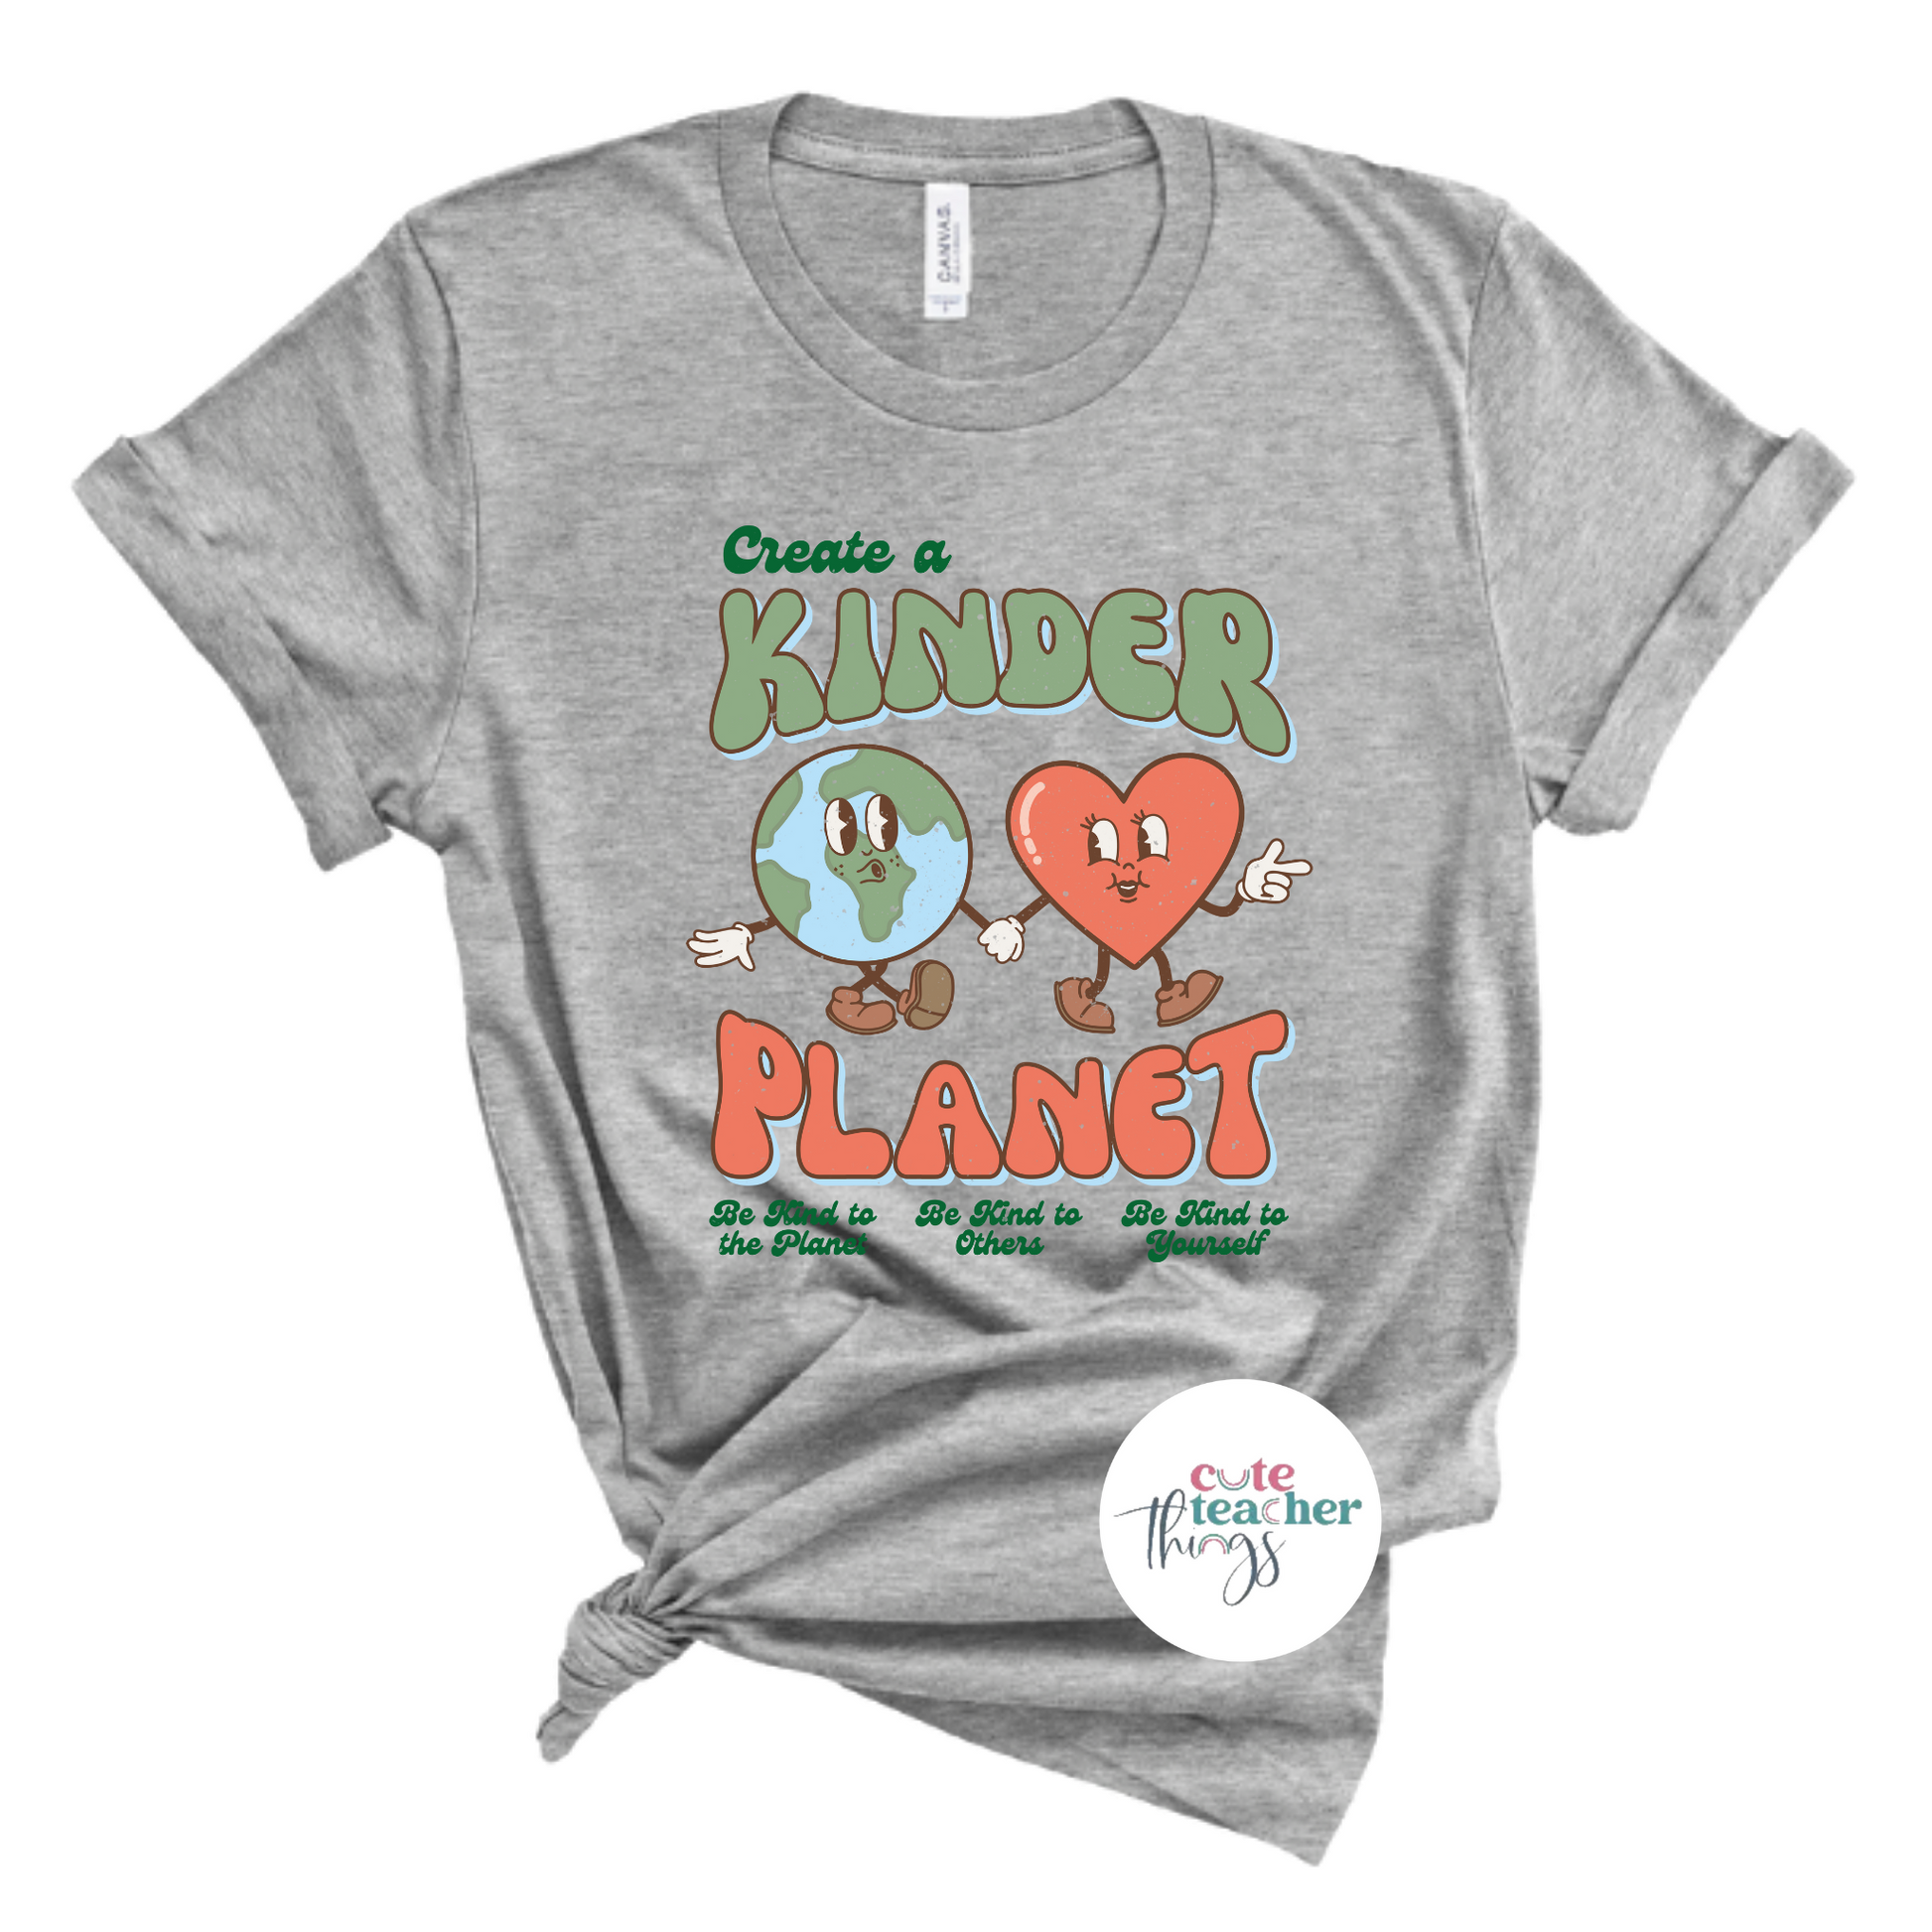 earth day shirt, be kind to others, be kind to yourself tee